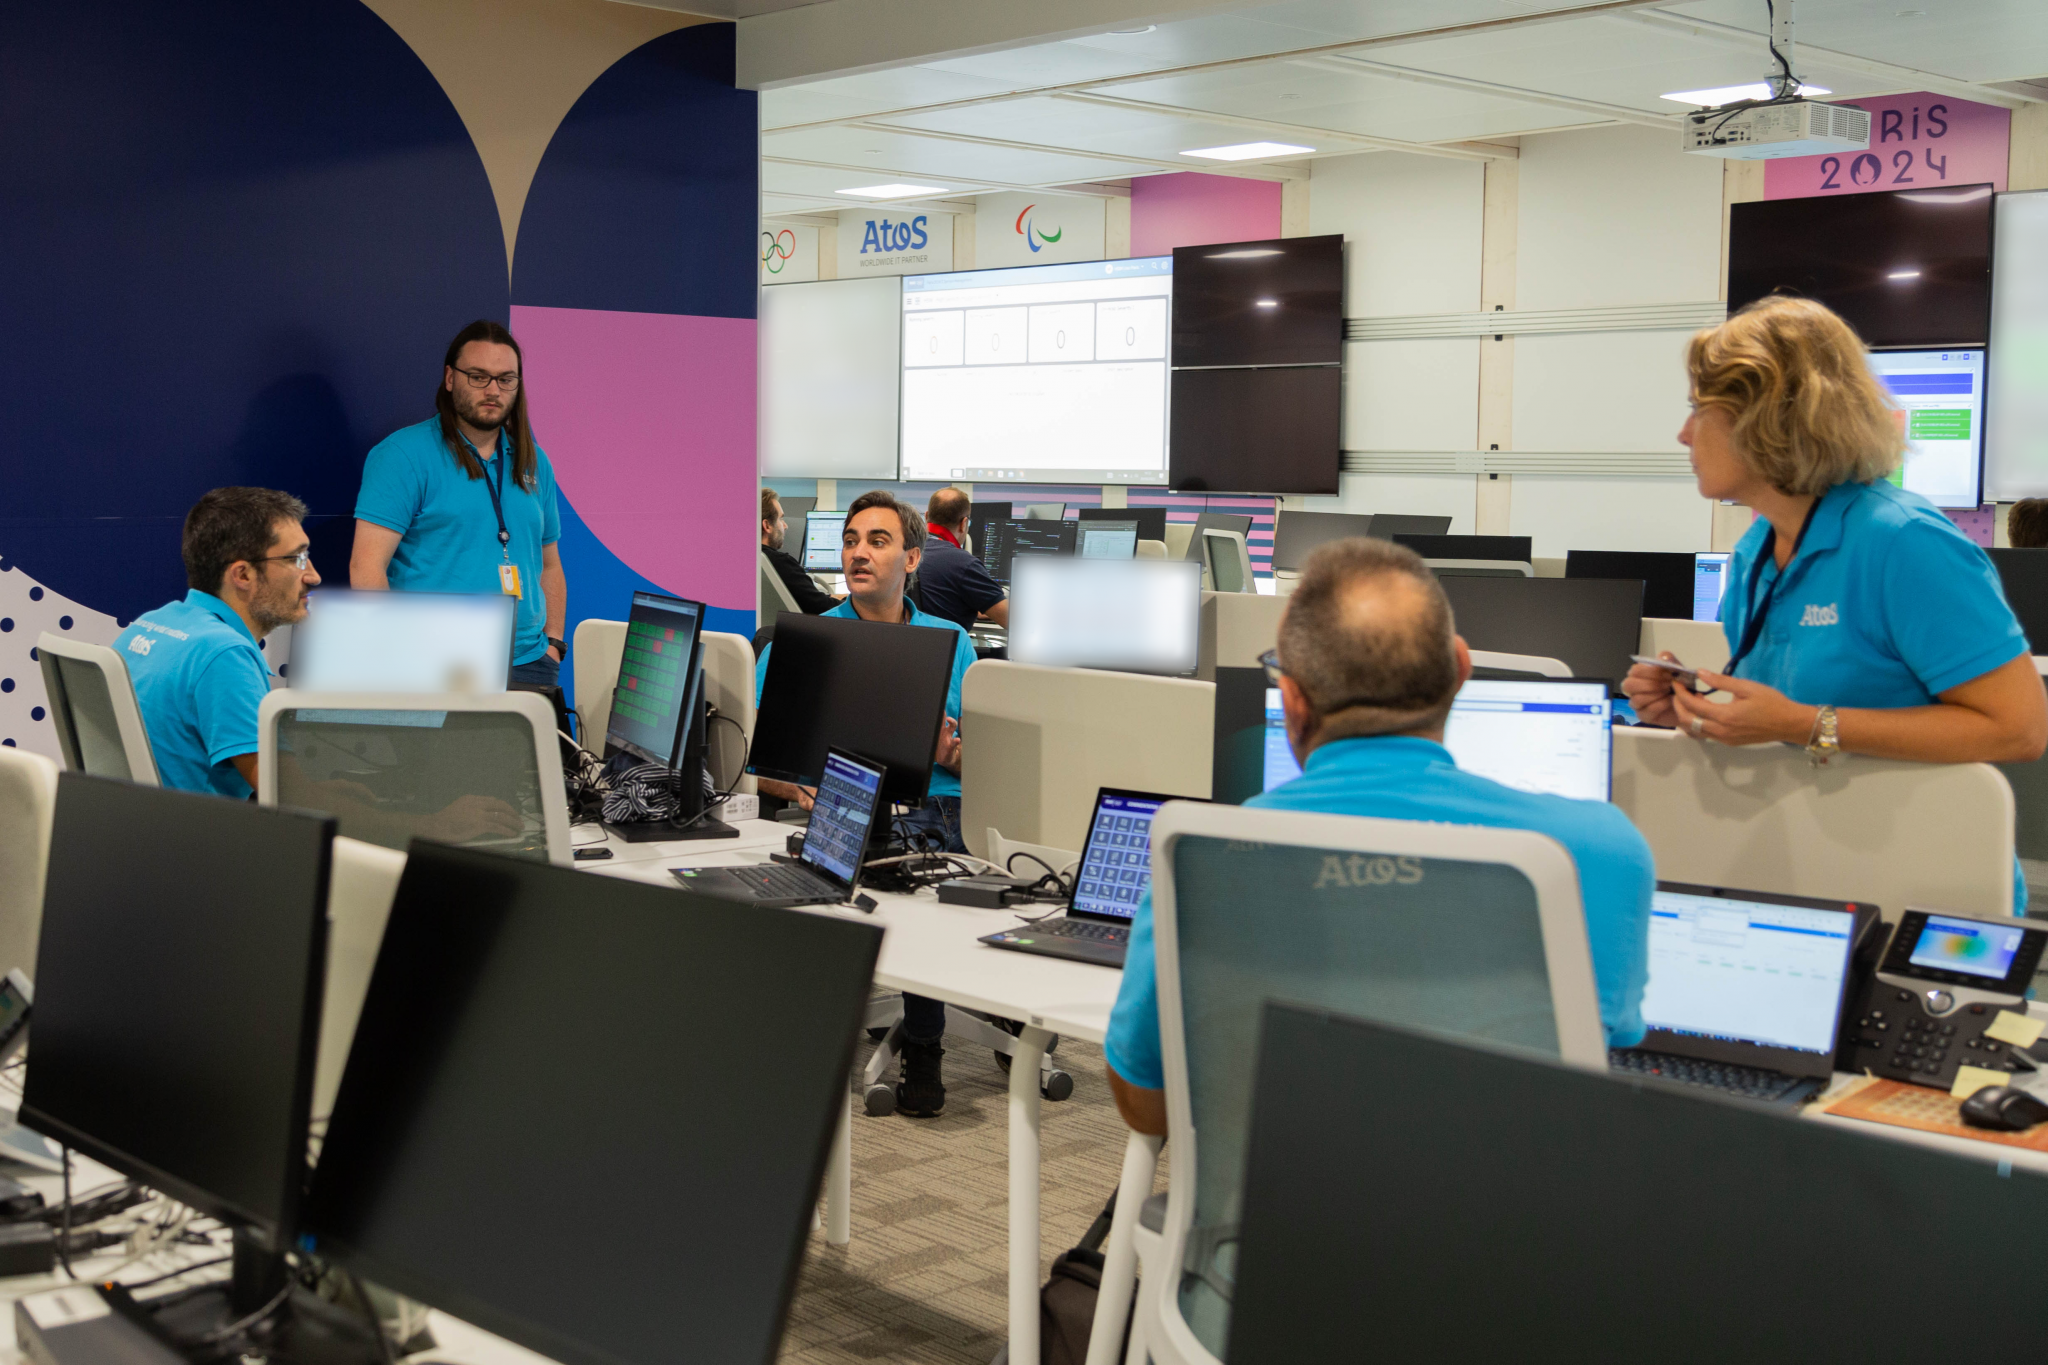 The Atos Technology Operations Center will be responsible for coordinating technology across 63 centres during the Paris 2024 Games ©Atos